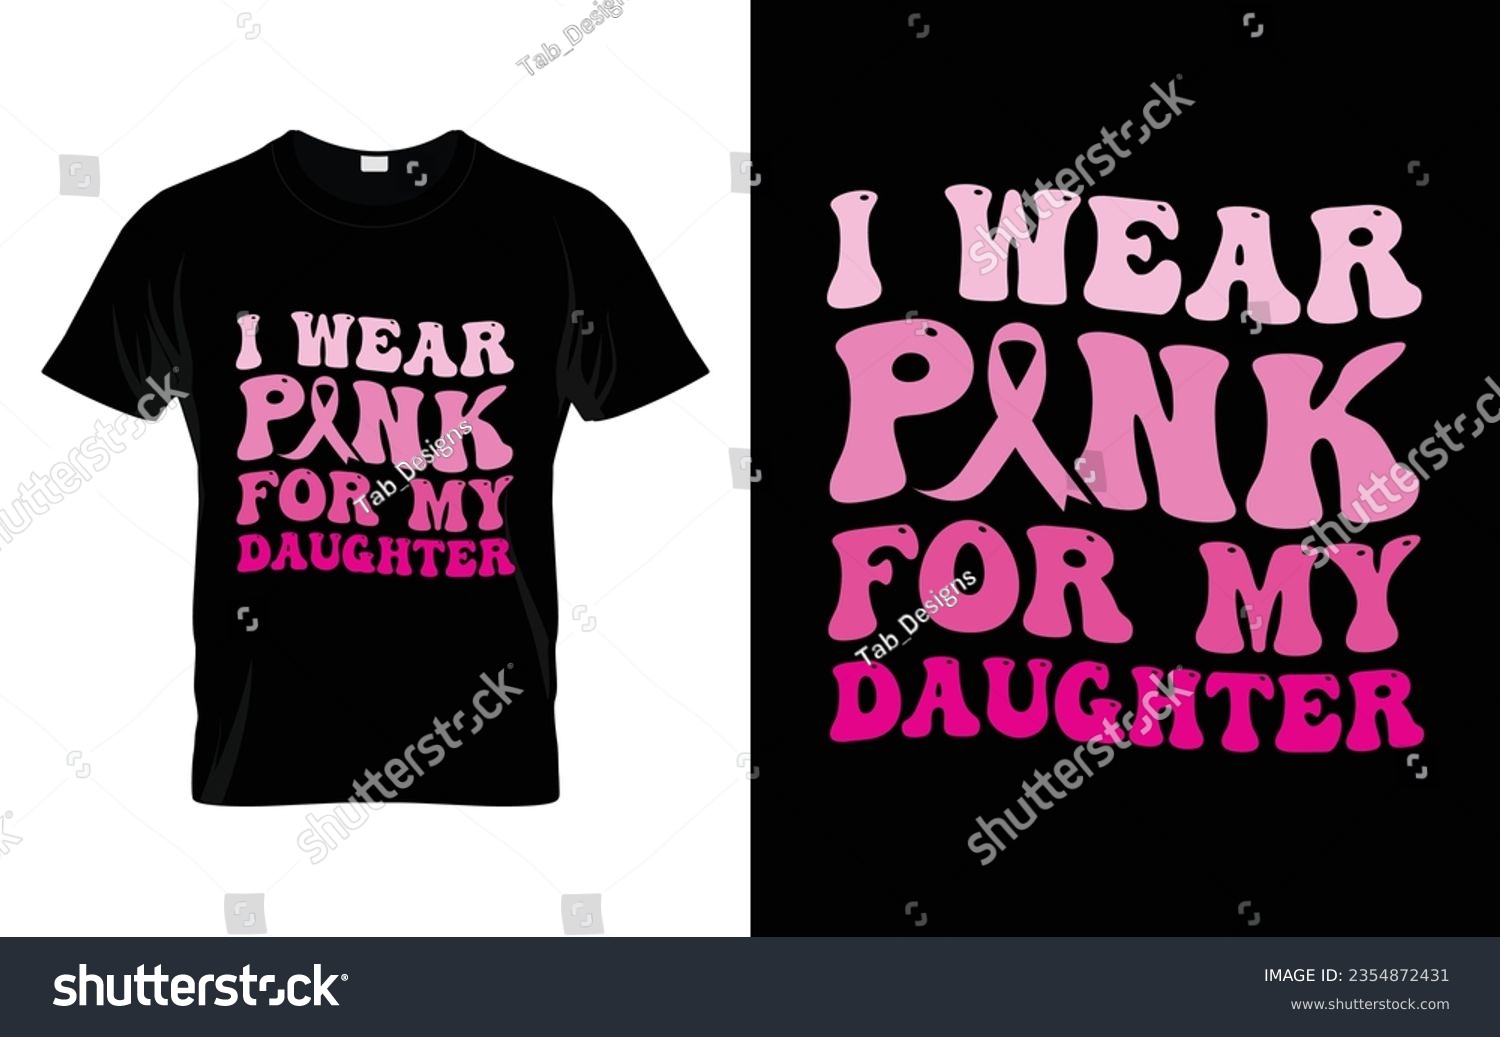 SVG of I wear pink for my Daughter pink ribbon Groovy Breast Cancer Awareness Month T shirt Design || Breast Cancer Awareness Groovy t shirt design. svg